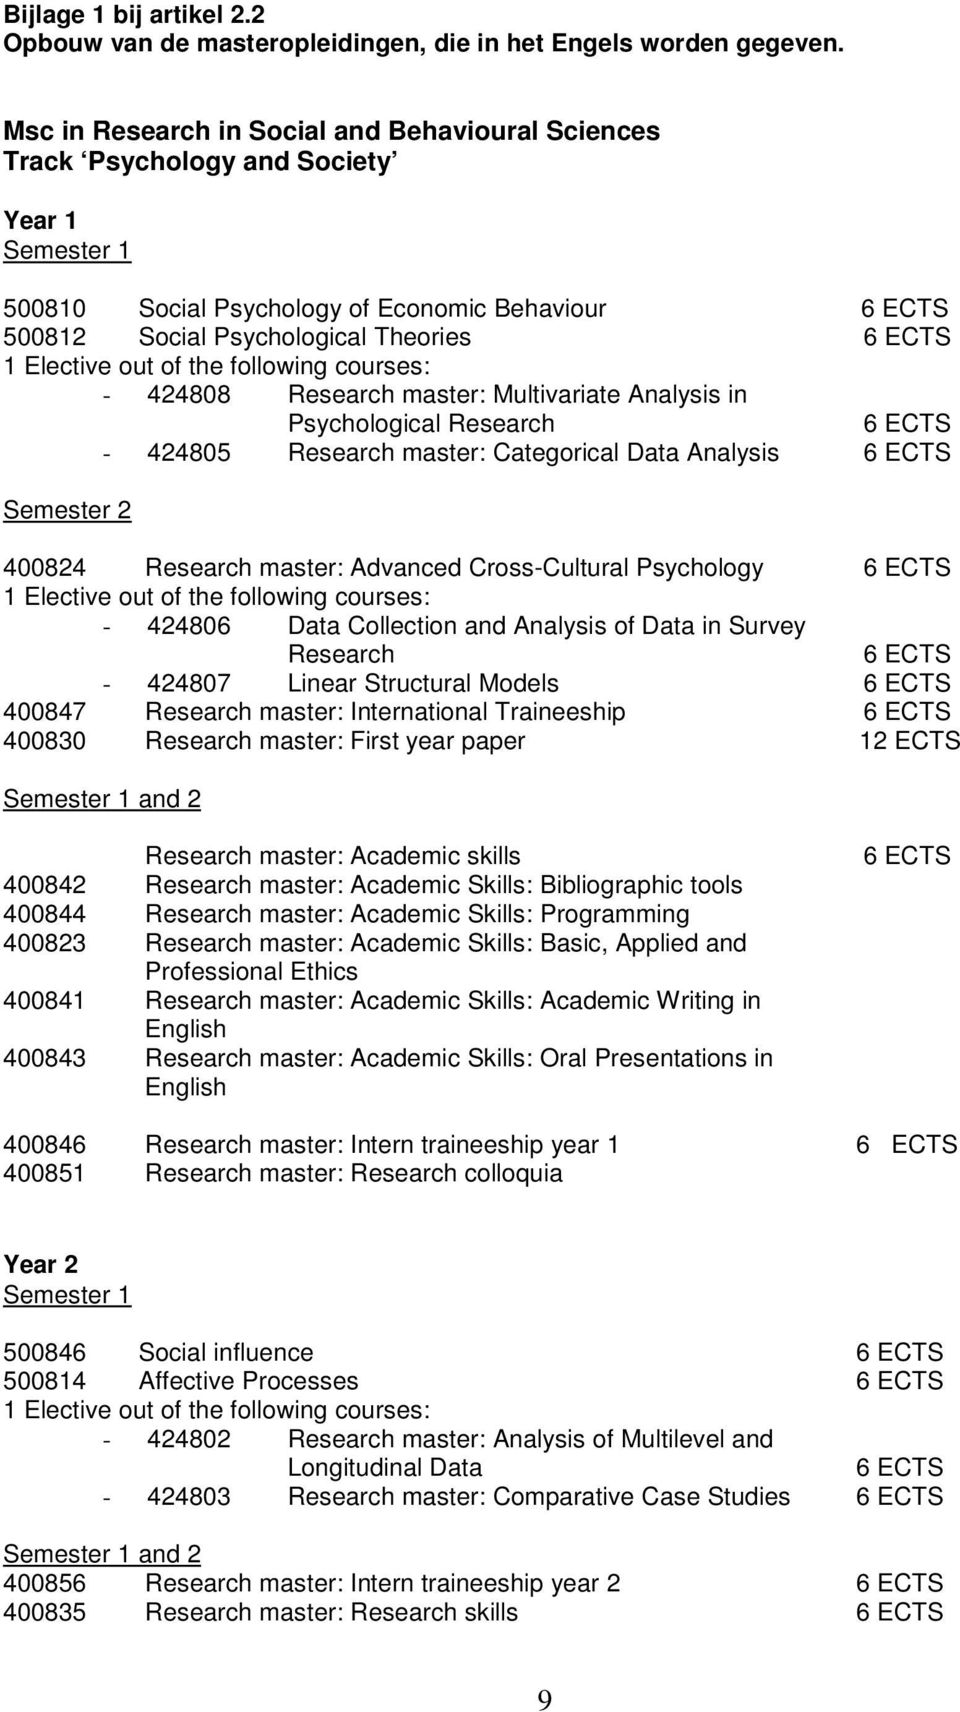 Multivariate Analysis in Psychological Research - 424805 Research master: Categorical Data Analysis Semester 2 400824 Research master: Advanced Cross-Cultural Psychology - 424806 Data Collection and